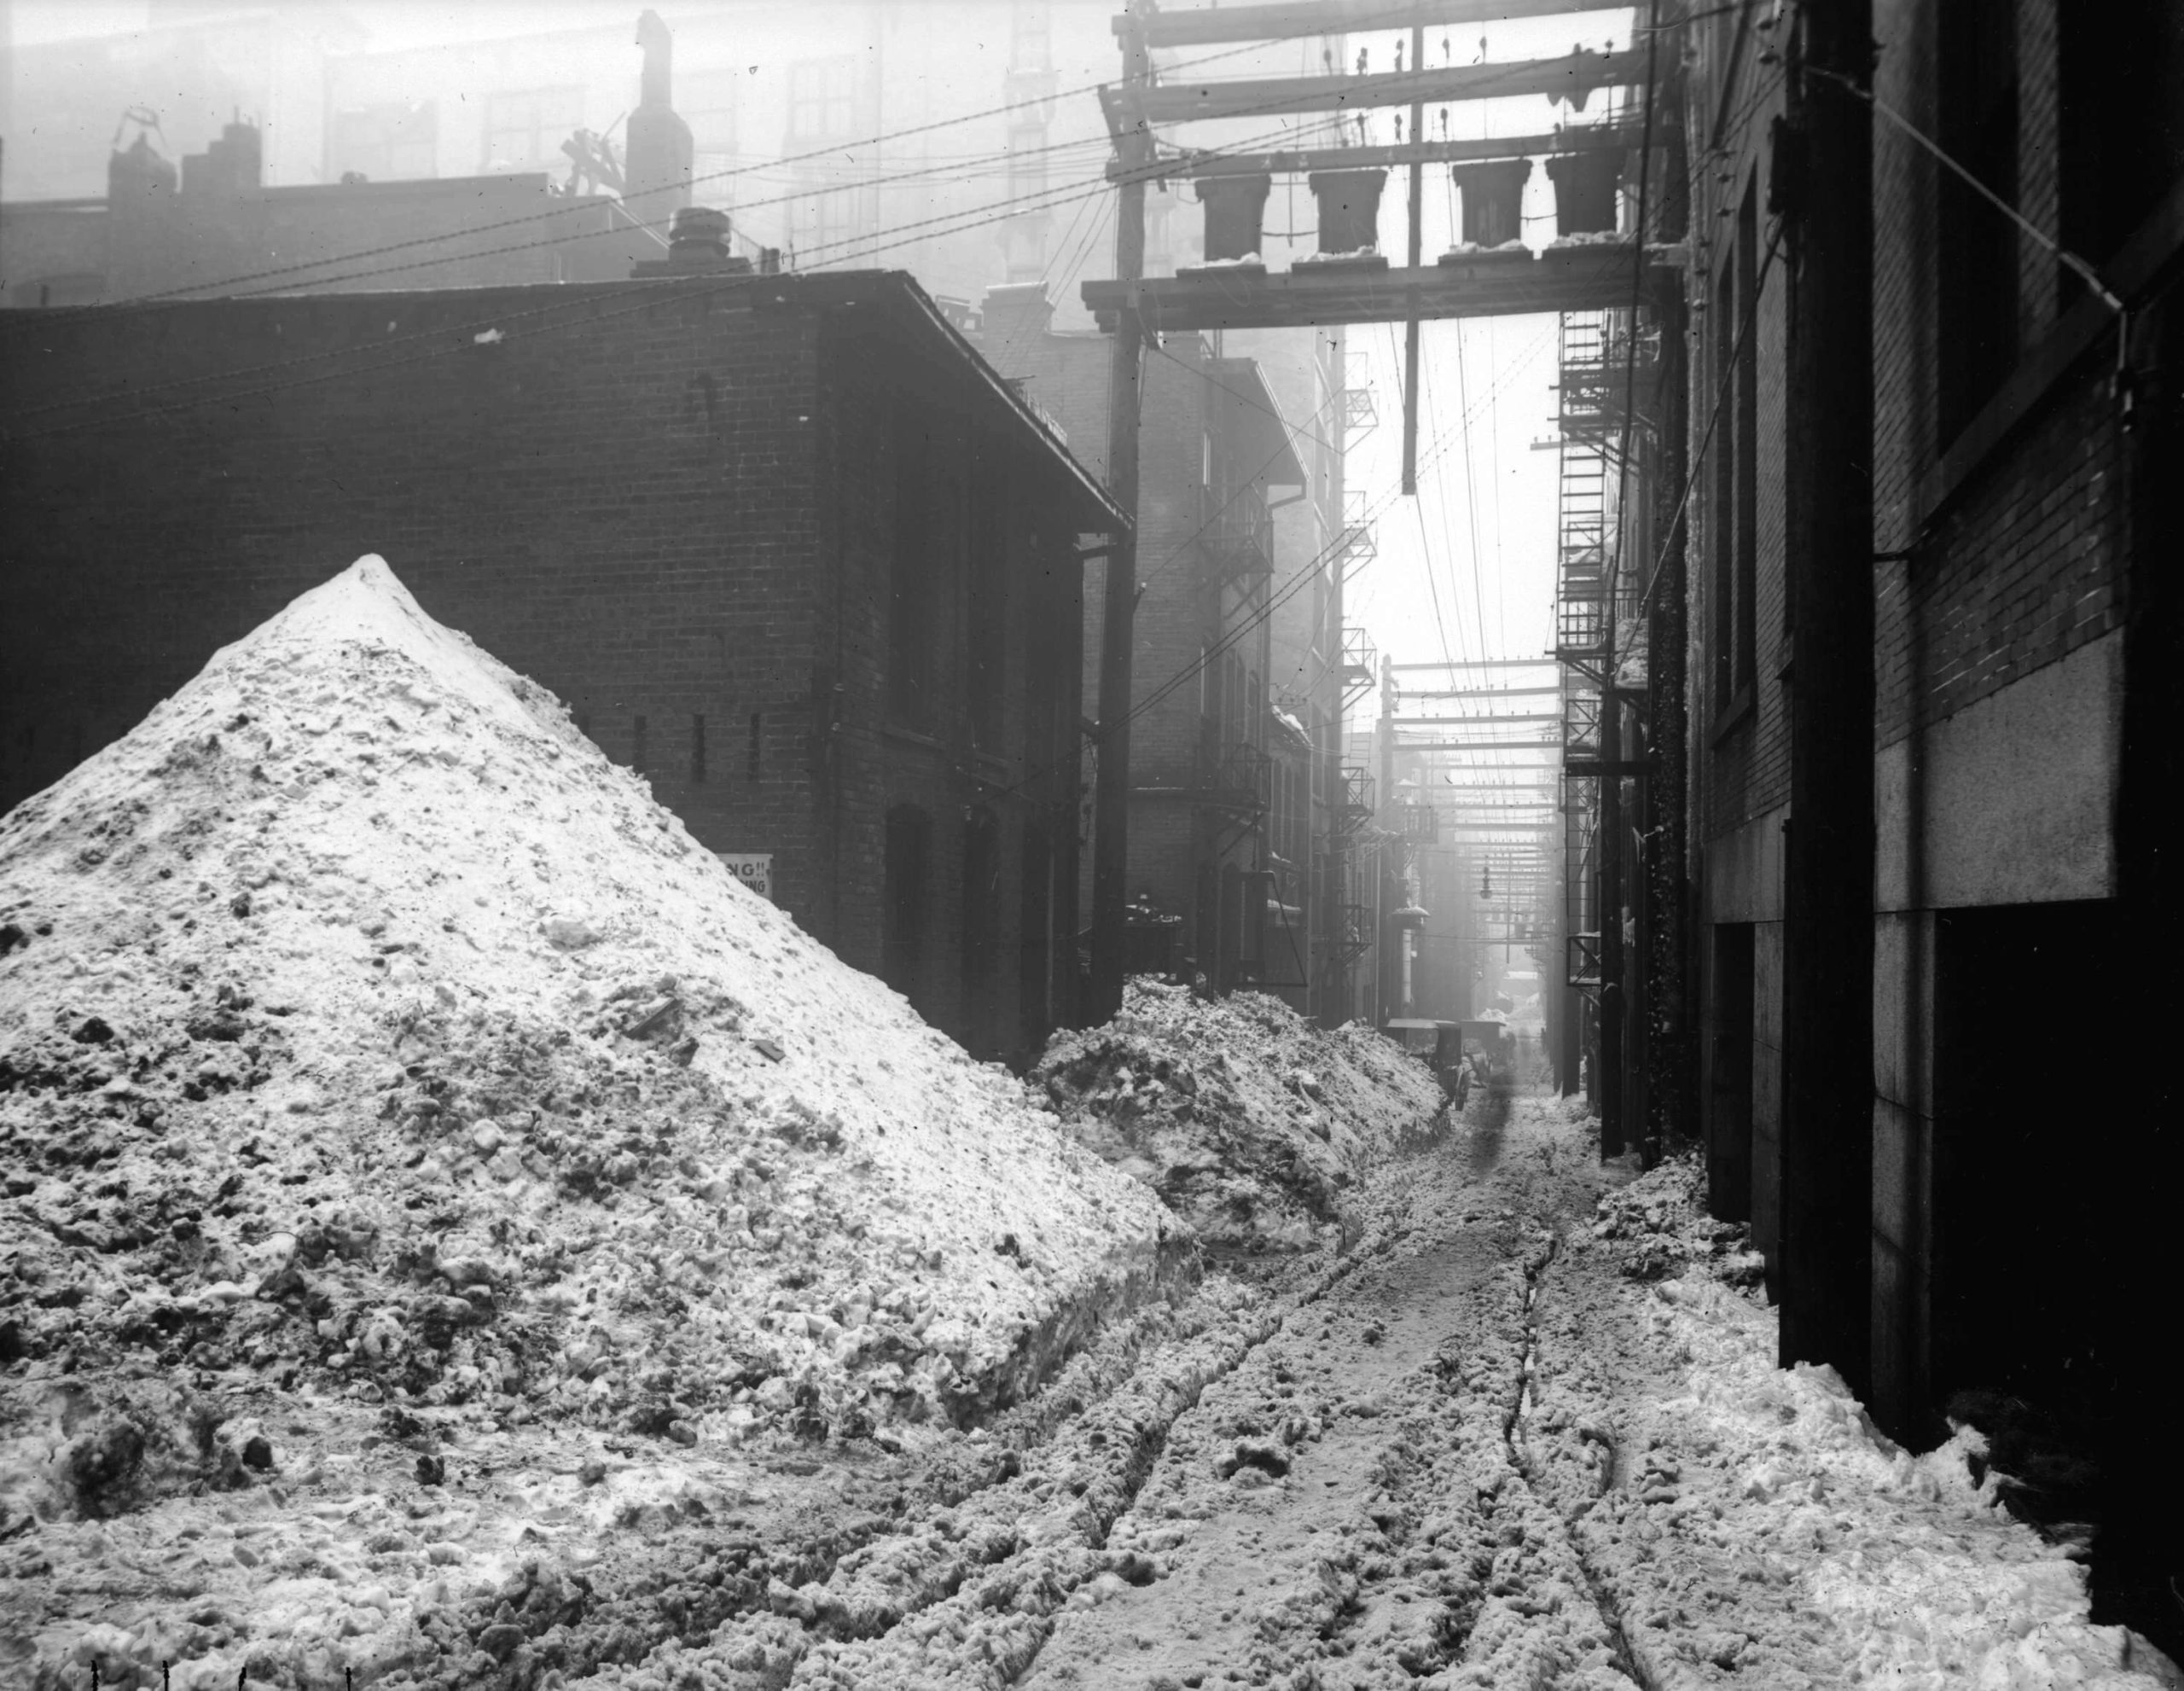 1916 - Snow in alley